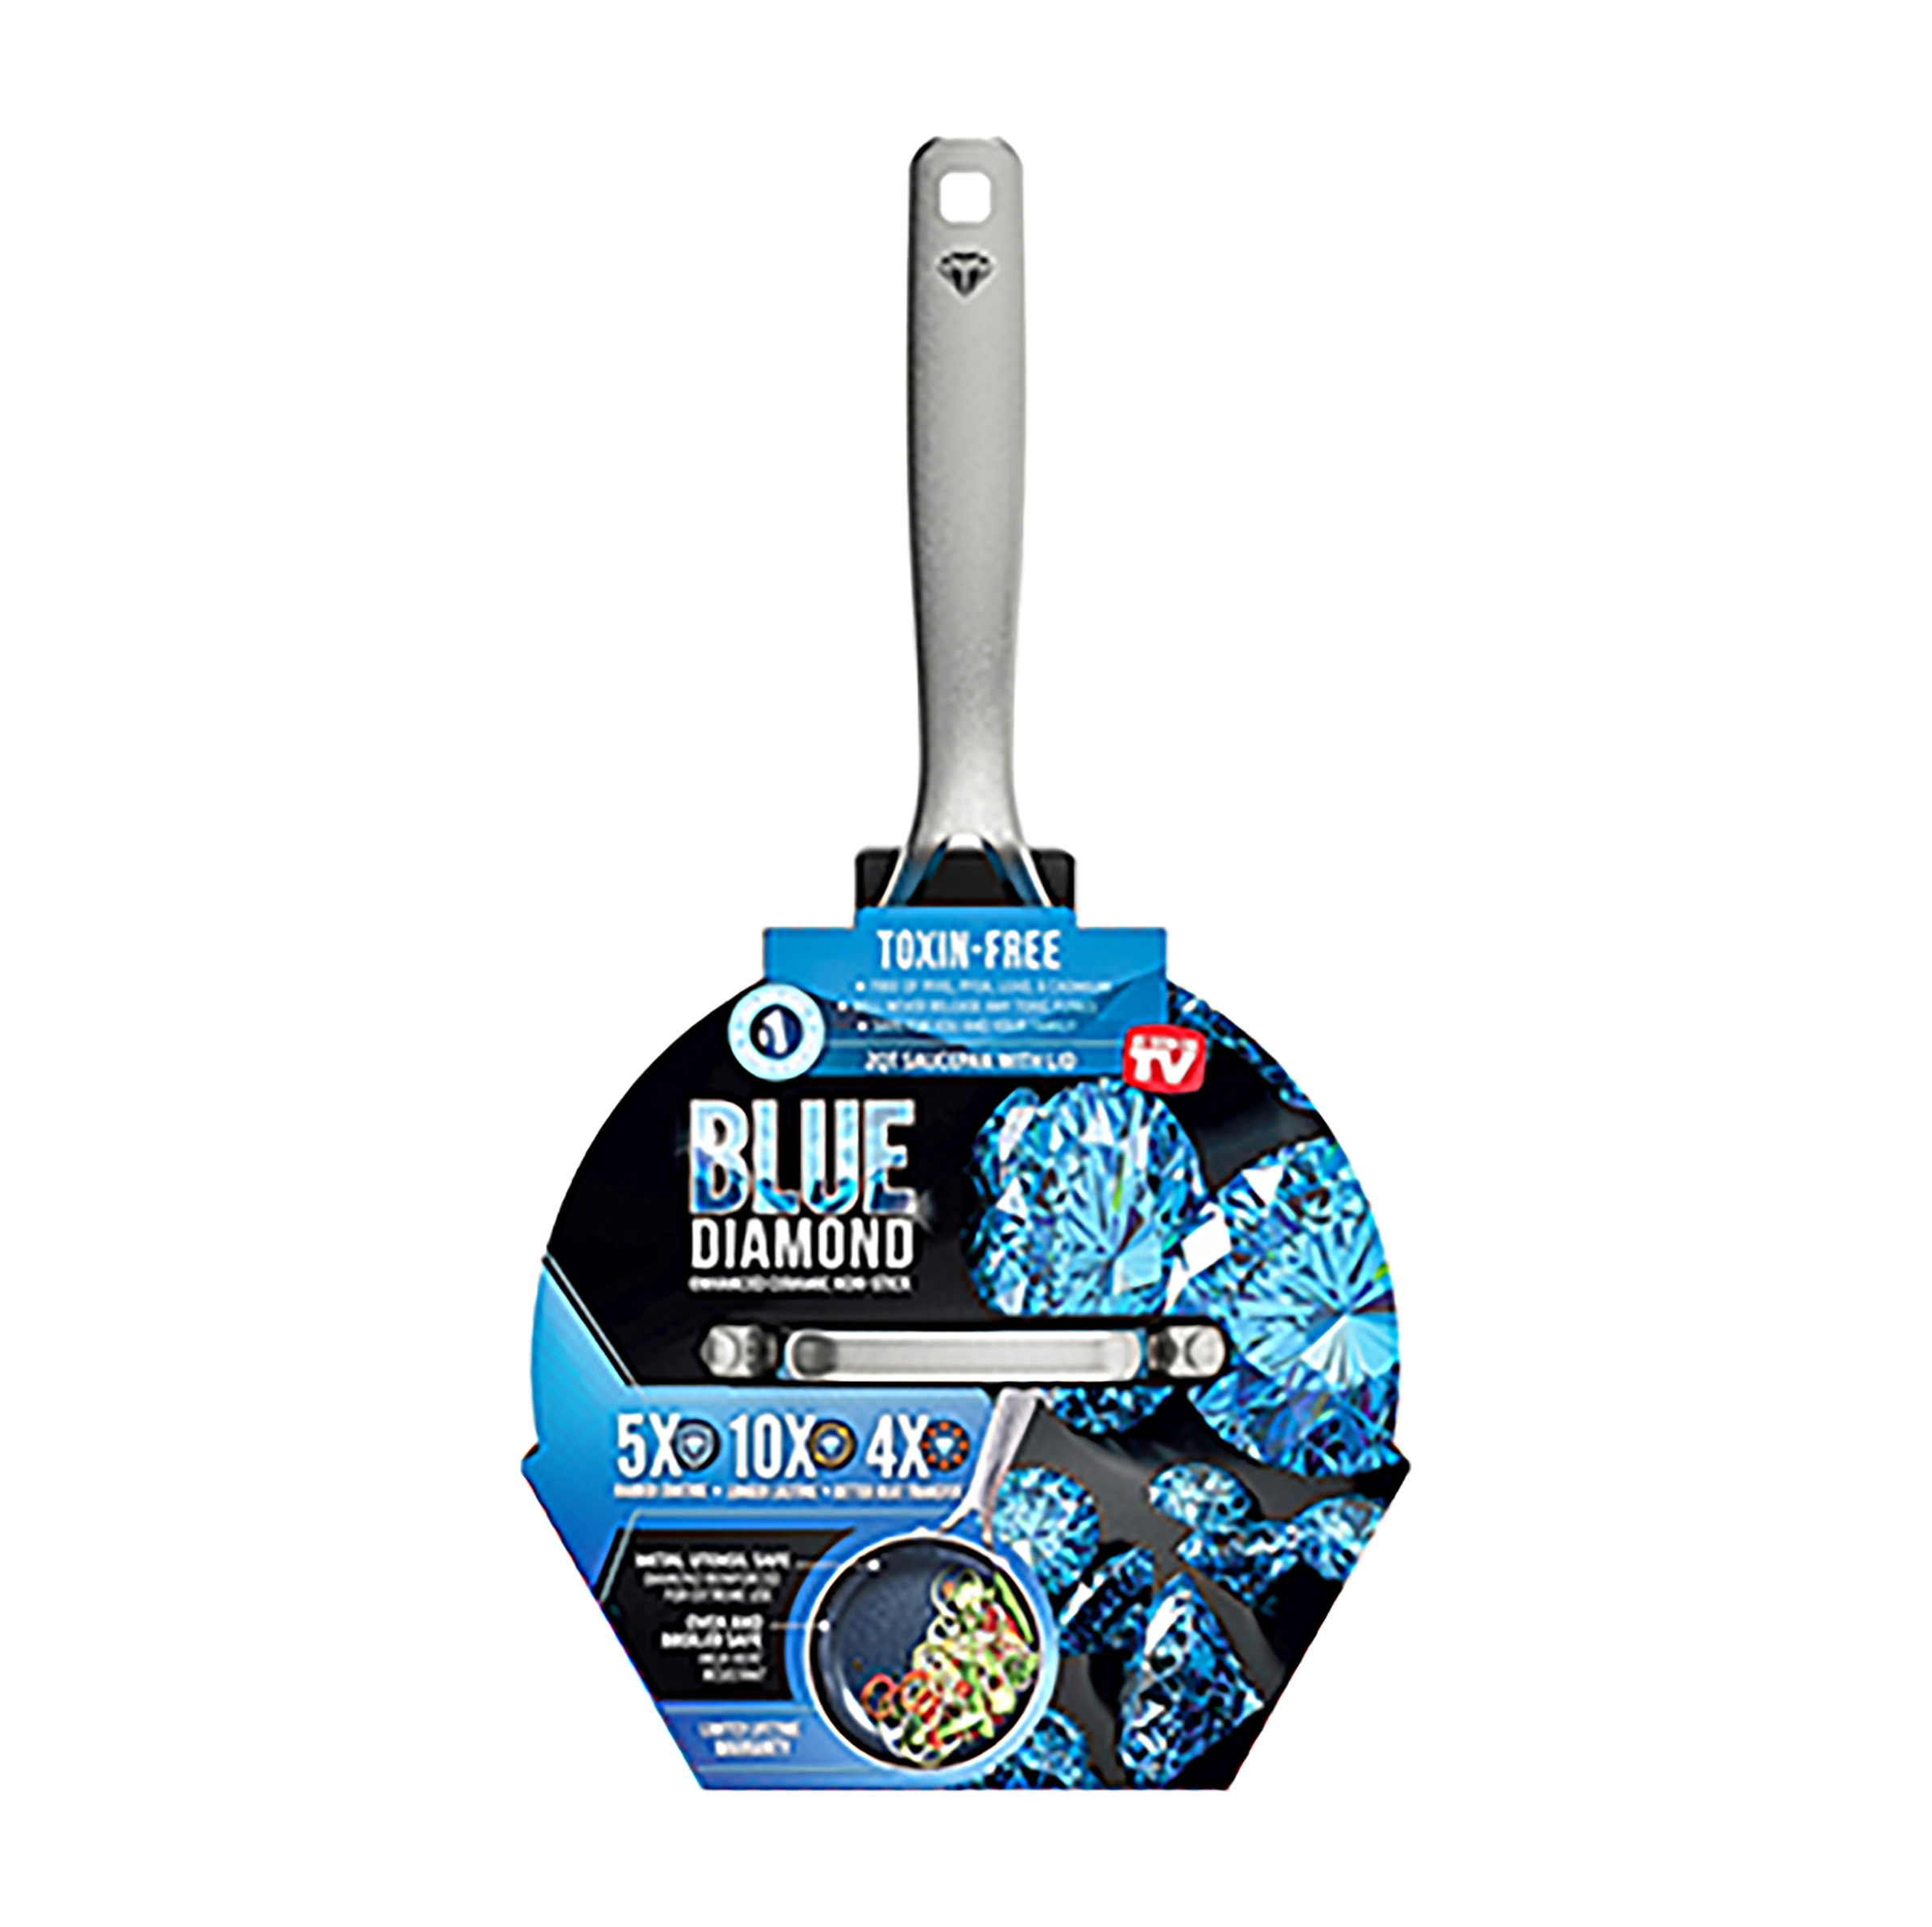 MsMk Frying pans nonstick with lid Blue, 10-inch Durable skillet, Titanium  and Diamond Non Stick Non-Toxic Coating From USA, Even Heating, Easy